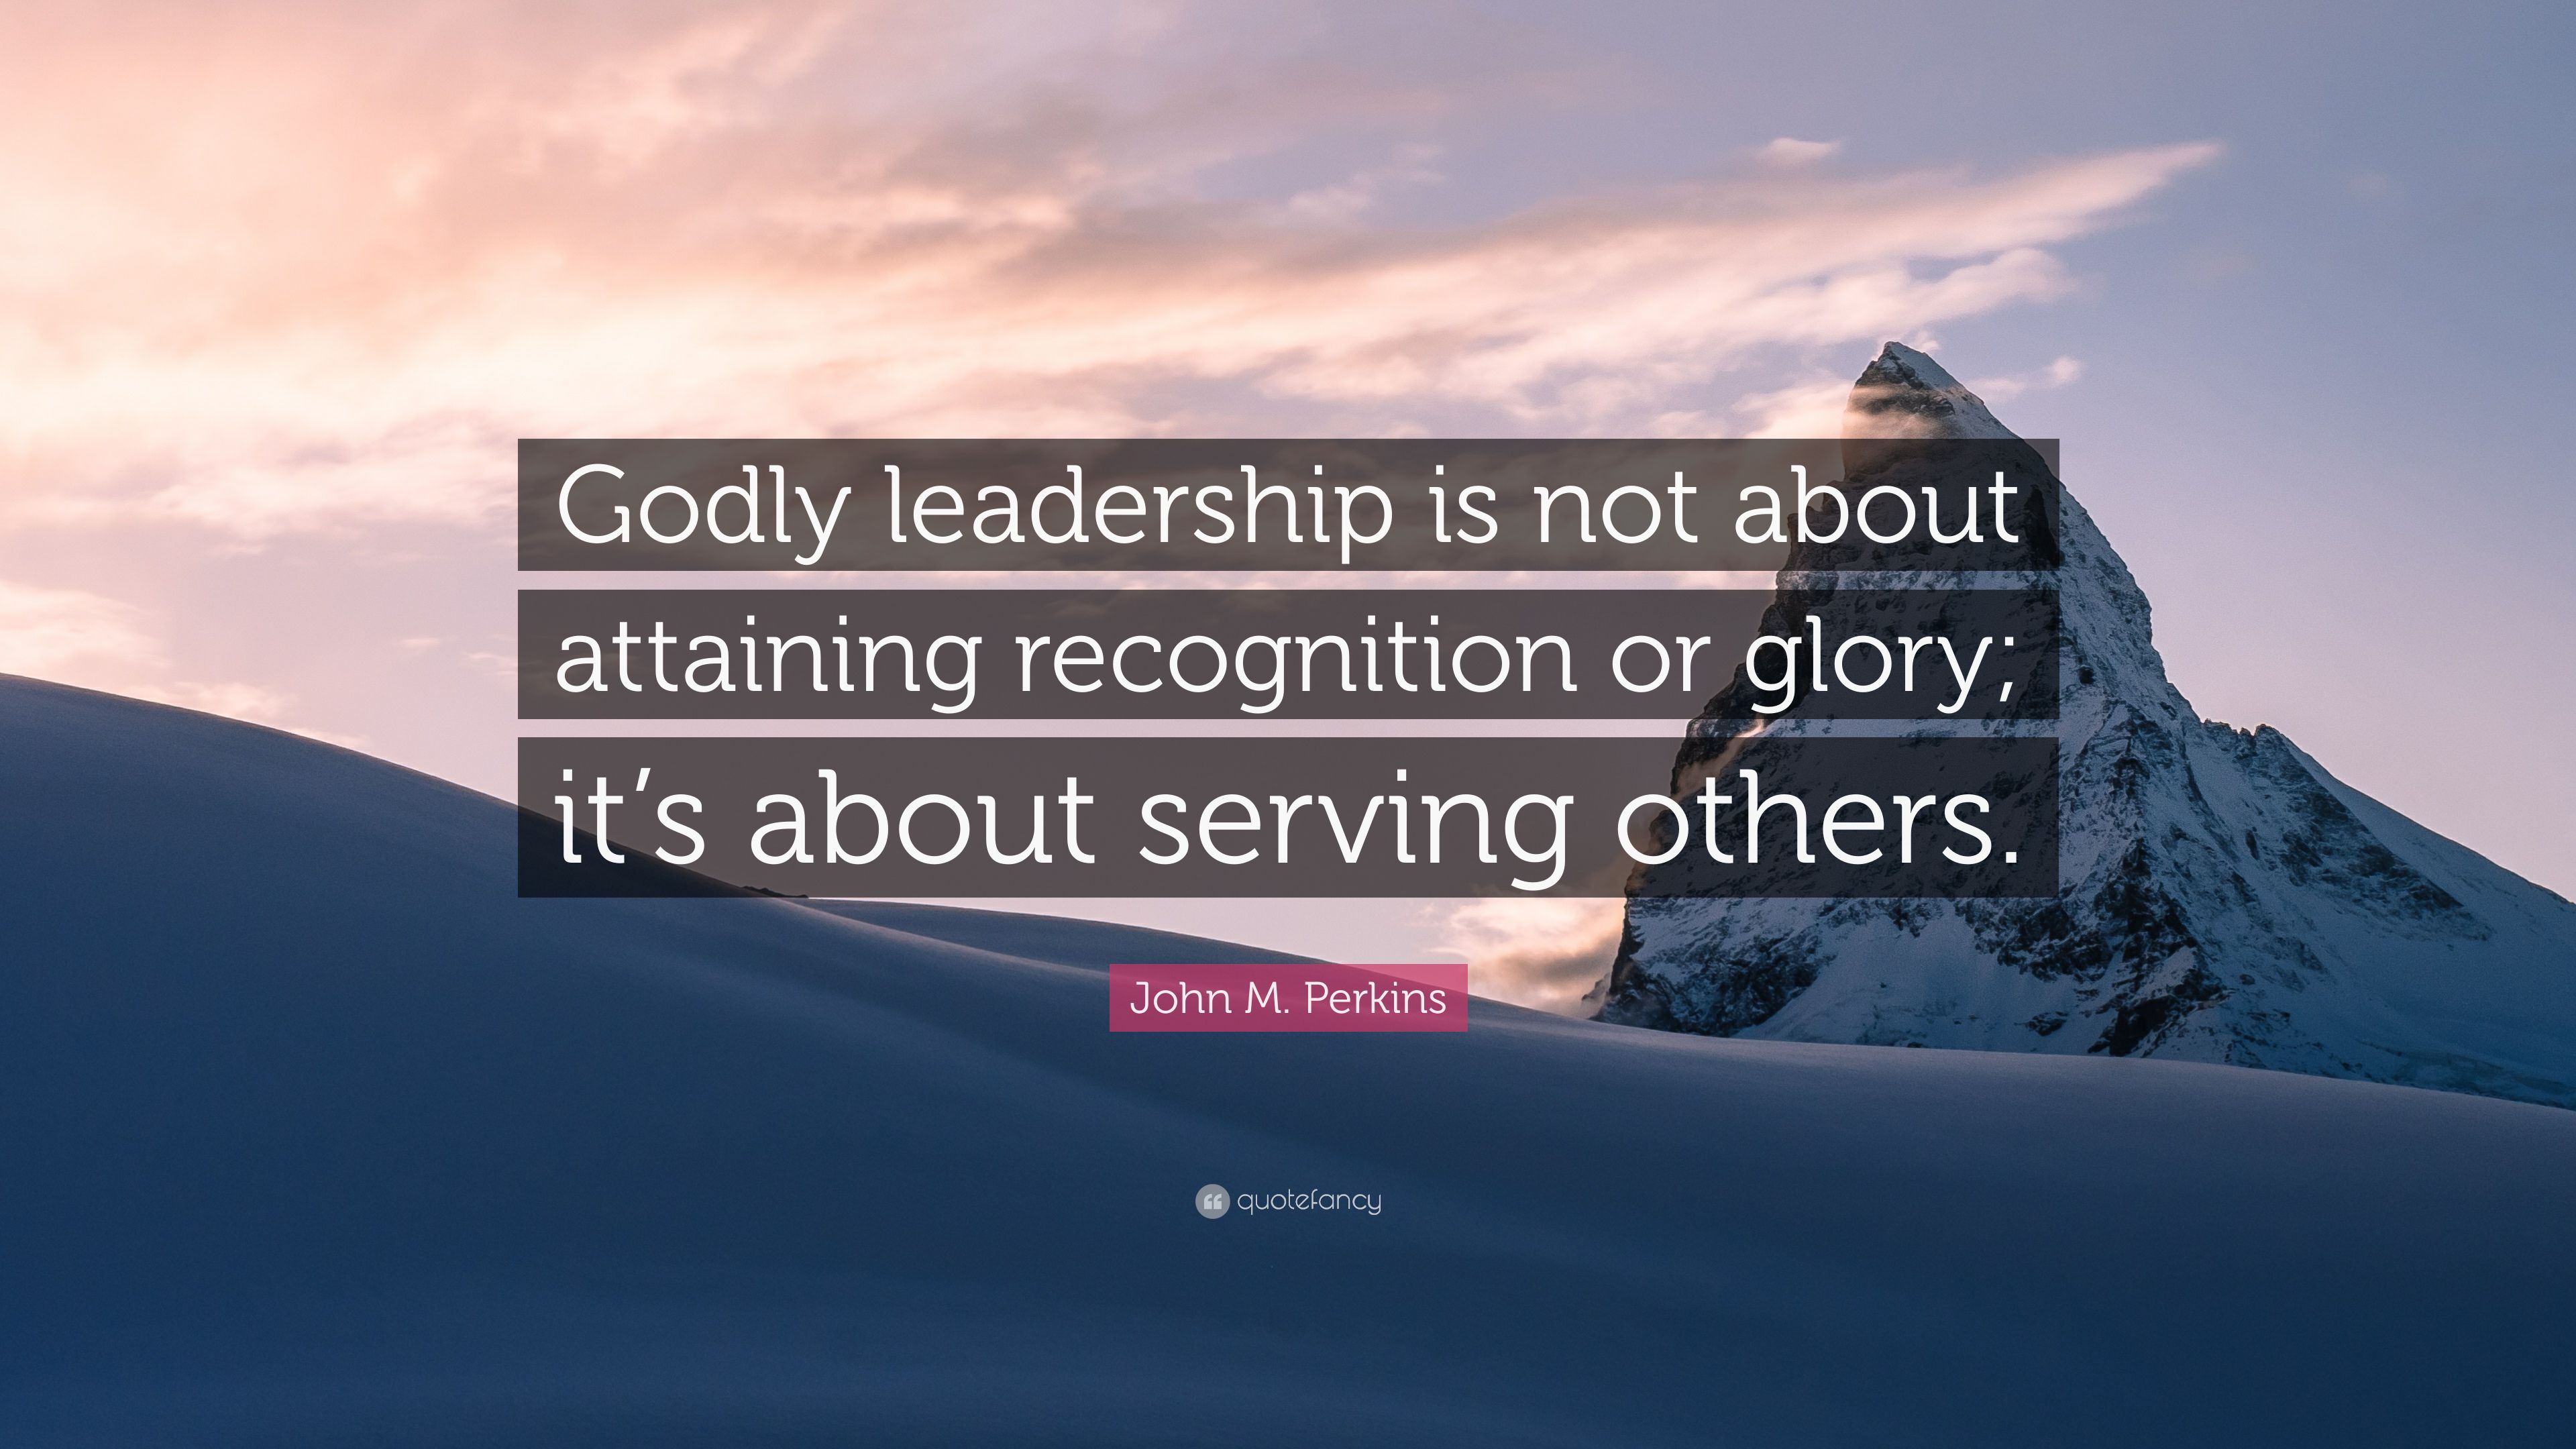 John M. Perkins Quote: “Godly leadership is not about attaining recognition or glory; it's about serving others.” (7 wallpaper)